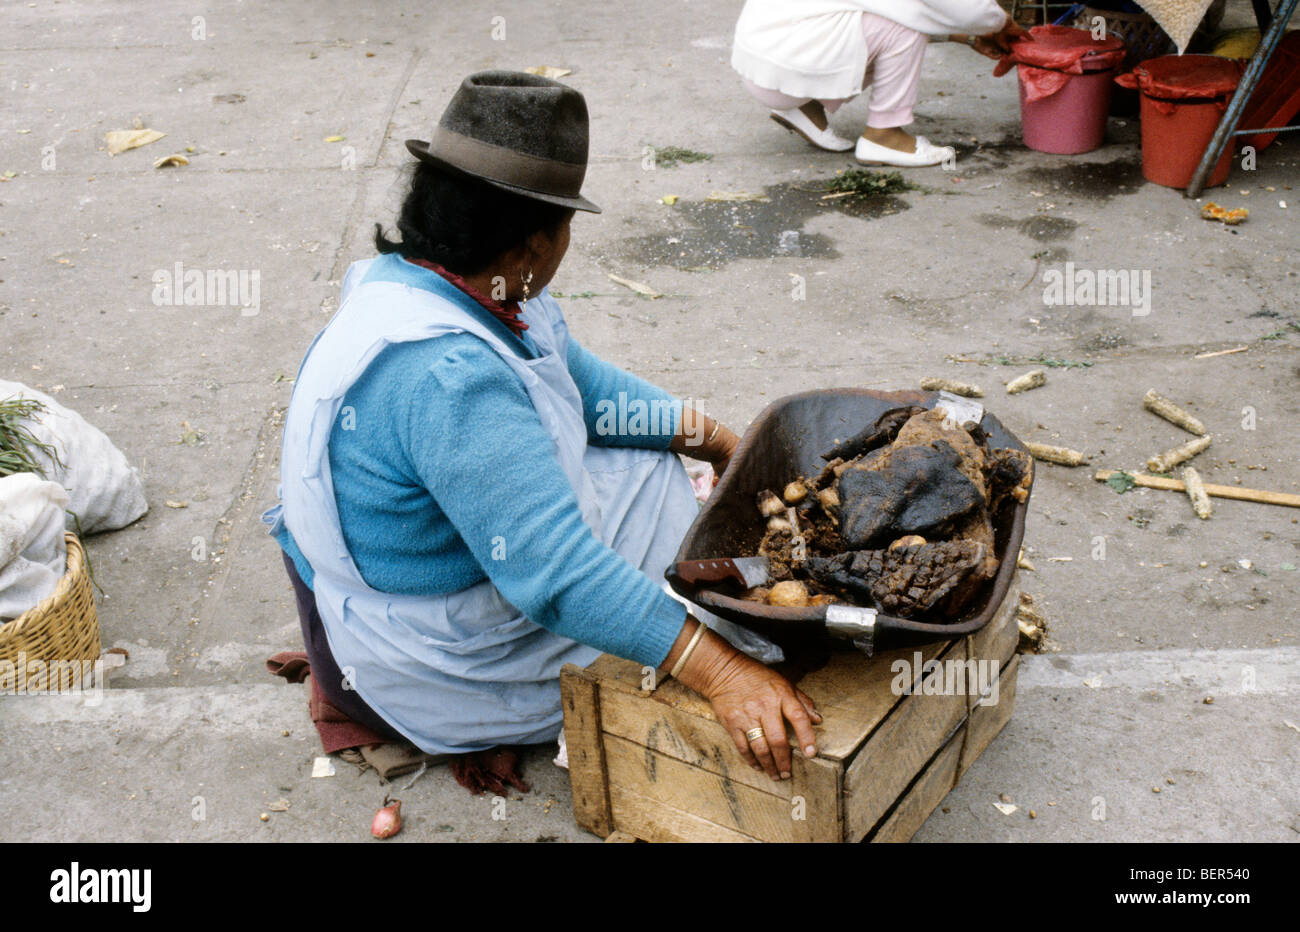 Woman squatting before a upturned wooden box with a metal tray of slabs of dried cooked meat.  Ecuador highlands local market. Stock Photo